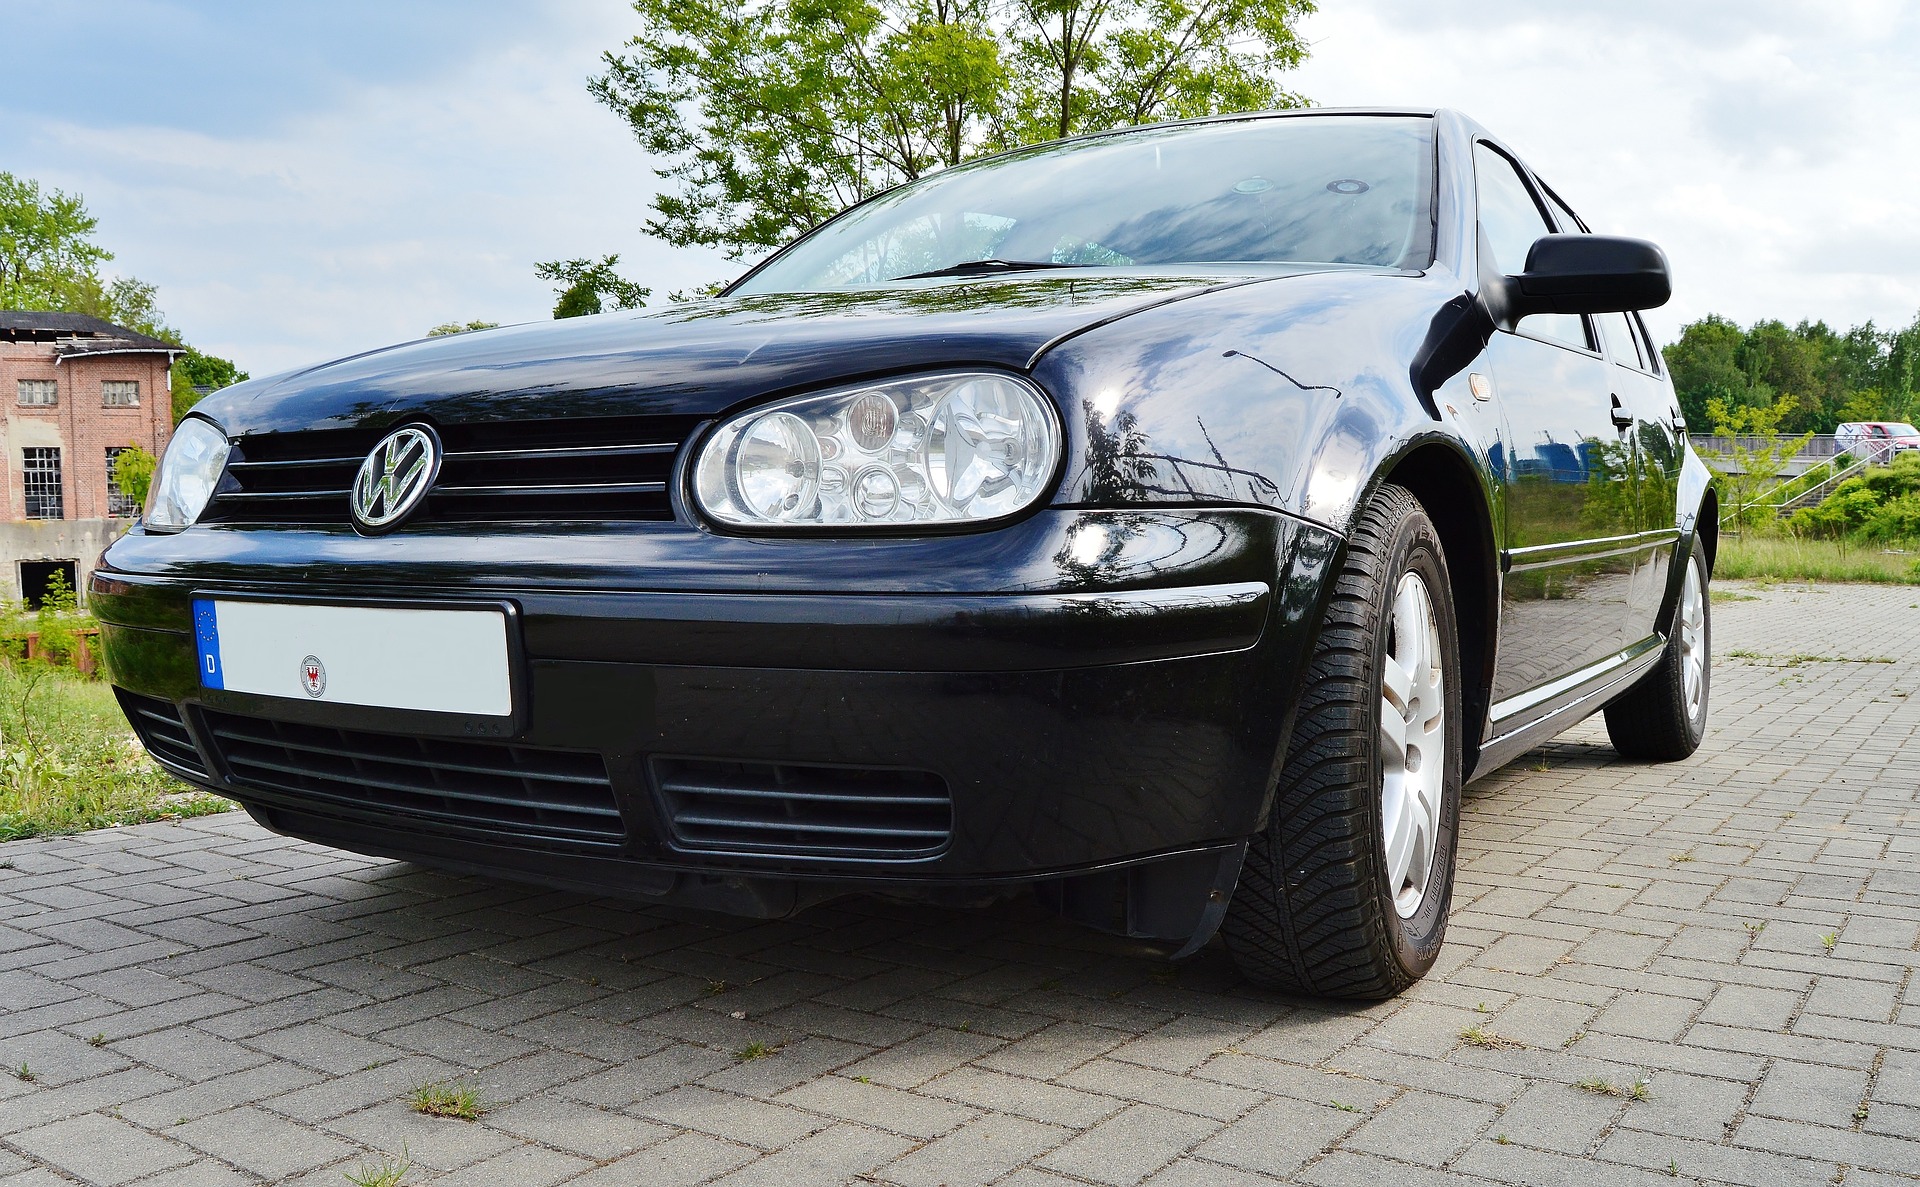 VW Golf IV - this is how you can optimize your VW Golf IV!